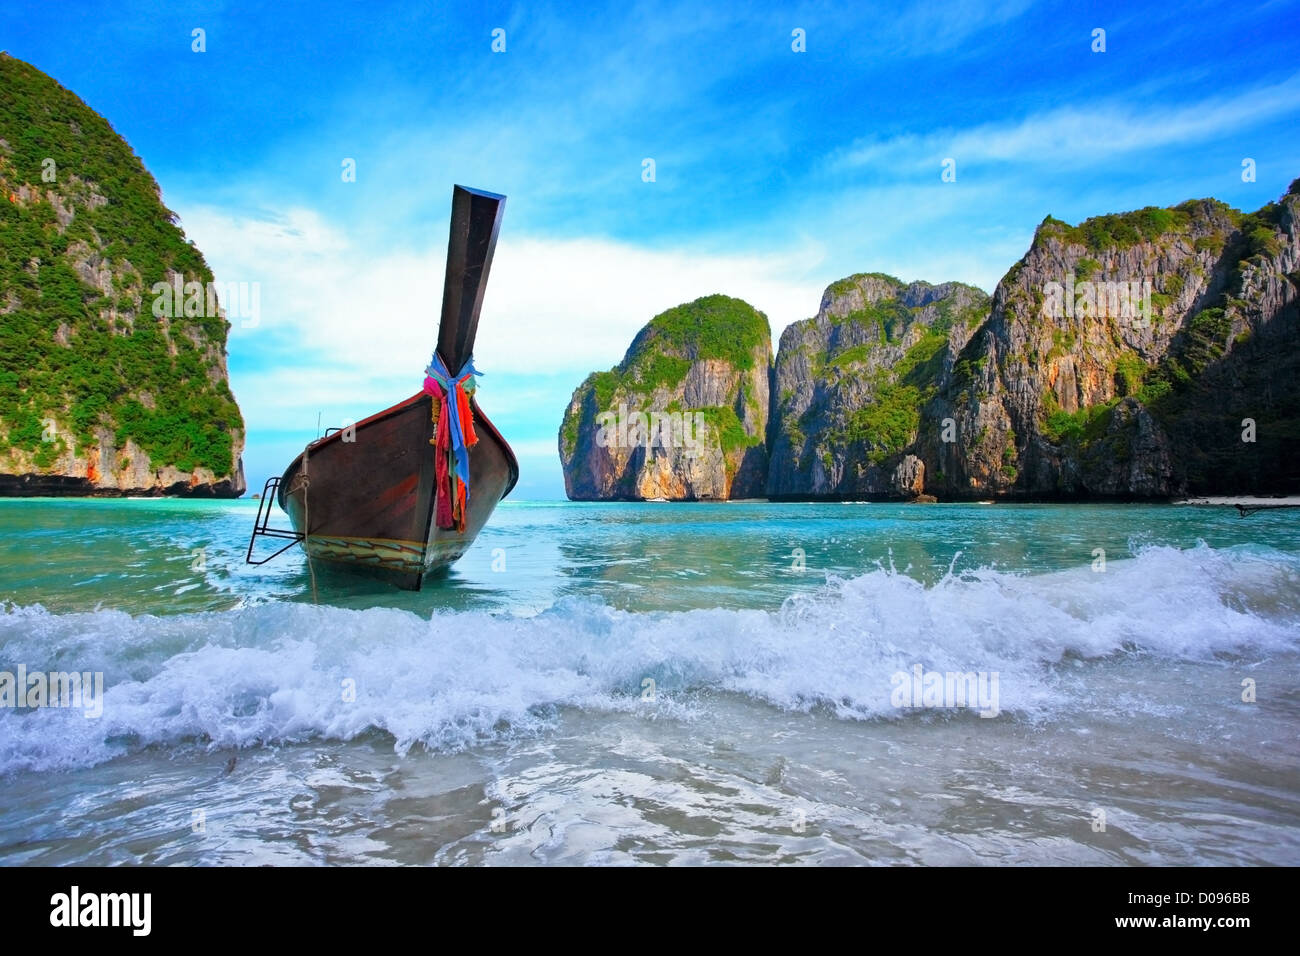 Long tail boats in Maya Bay, Koh Phi Phi Ley, Thailand. The place where the movie the Beach was filmed Stock Photo